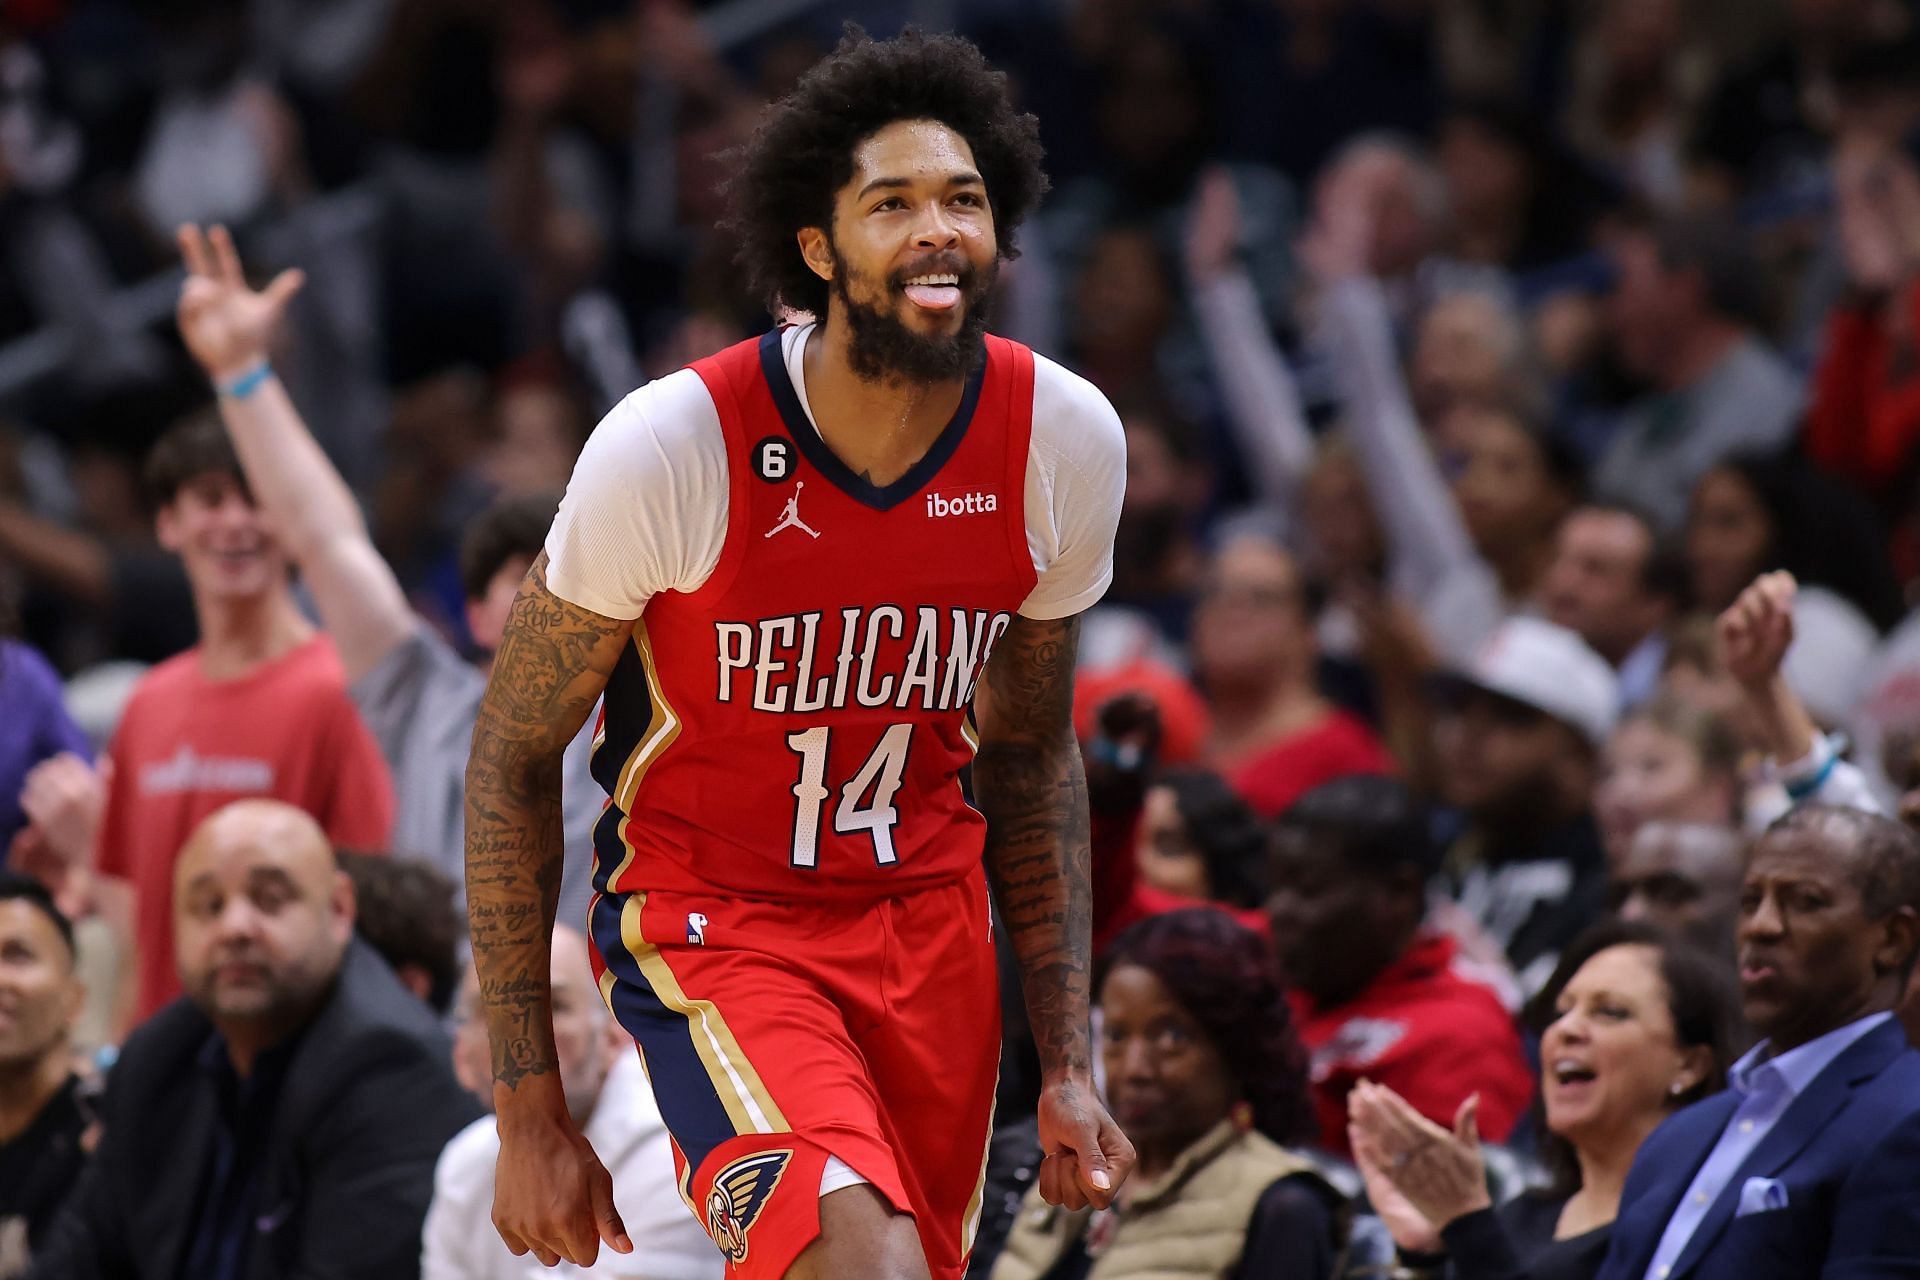 The New Orleans Pelicans will miss former NBA All-Star Brandon Ingram for two games.